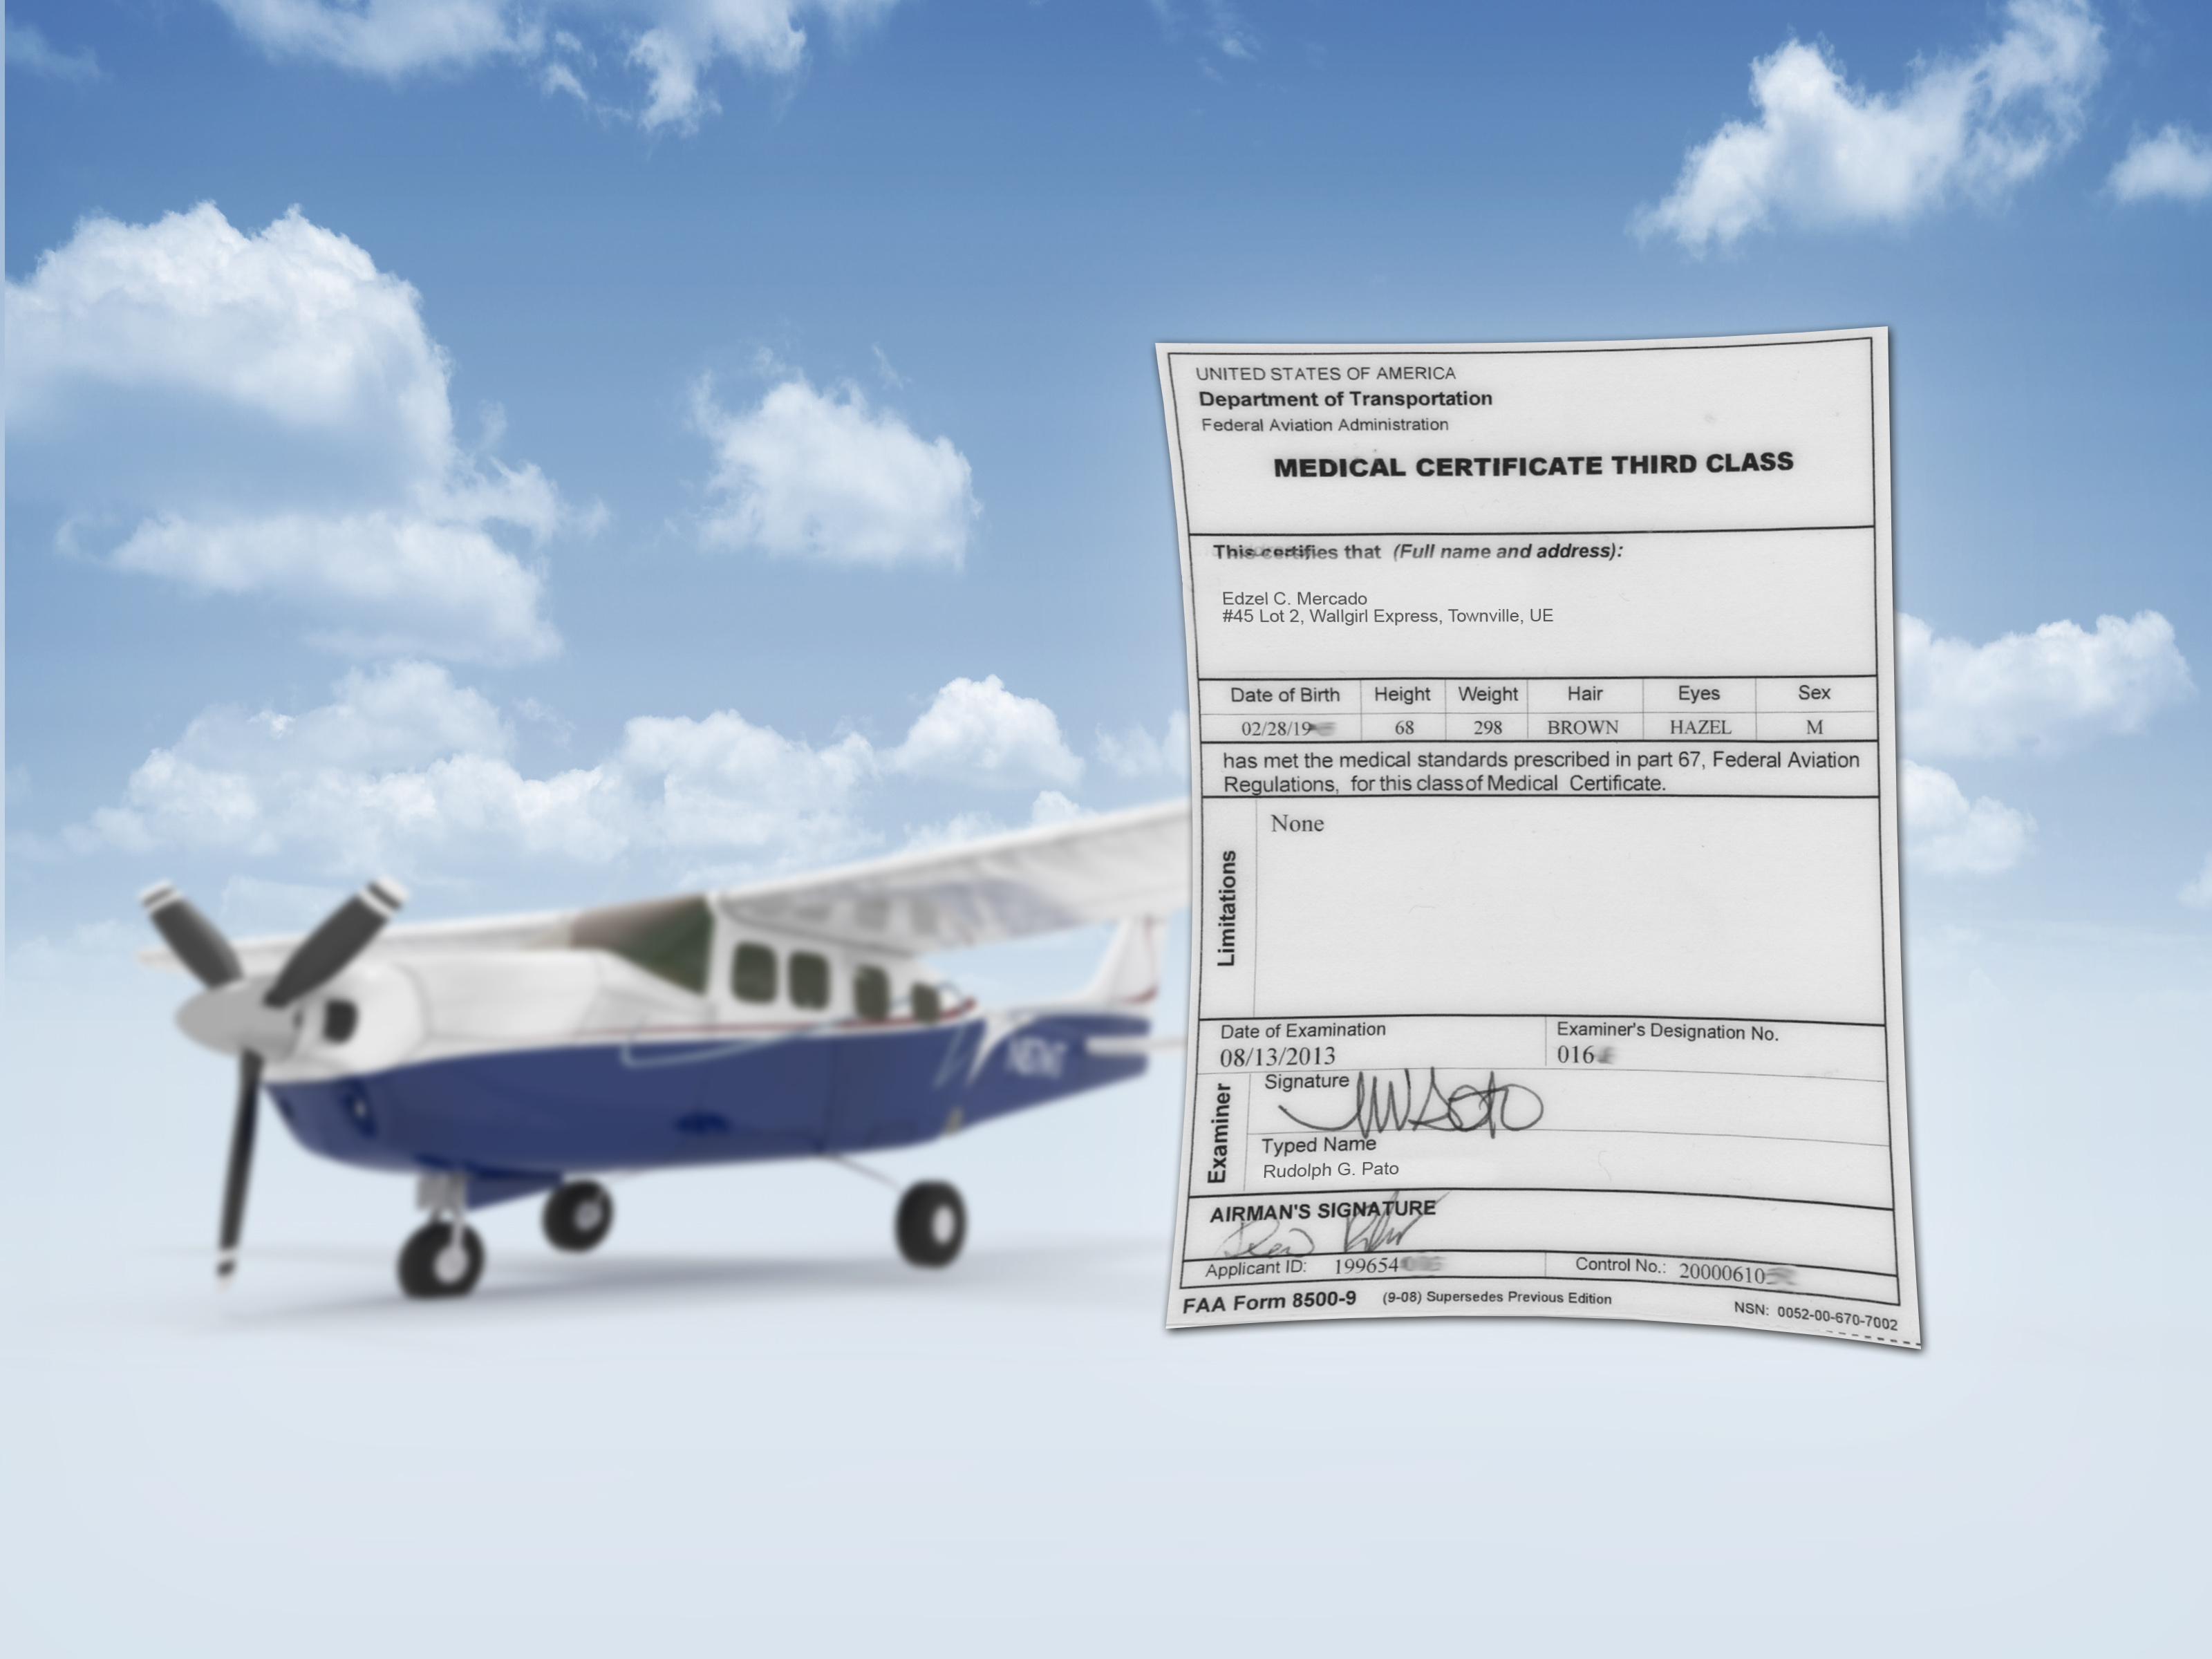 How to Become Qualified to Fly a Plane: 8 Steps (with Pictures)